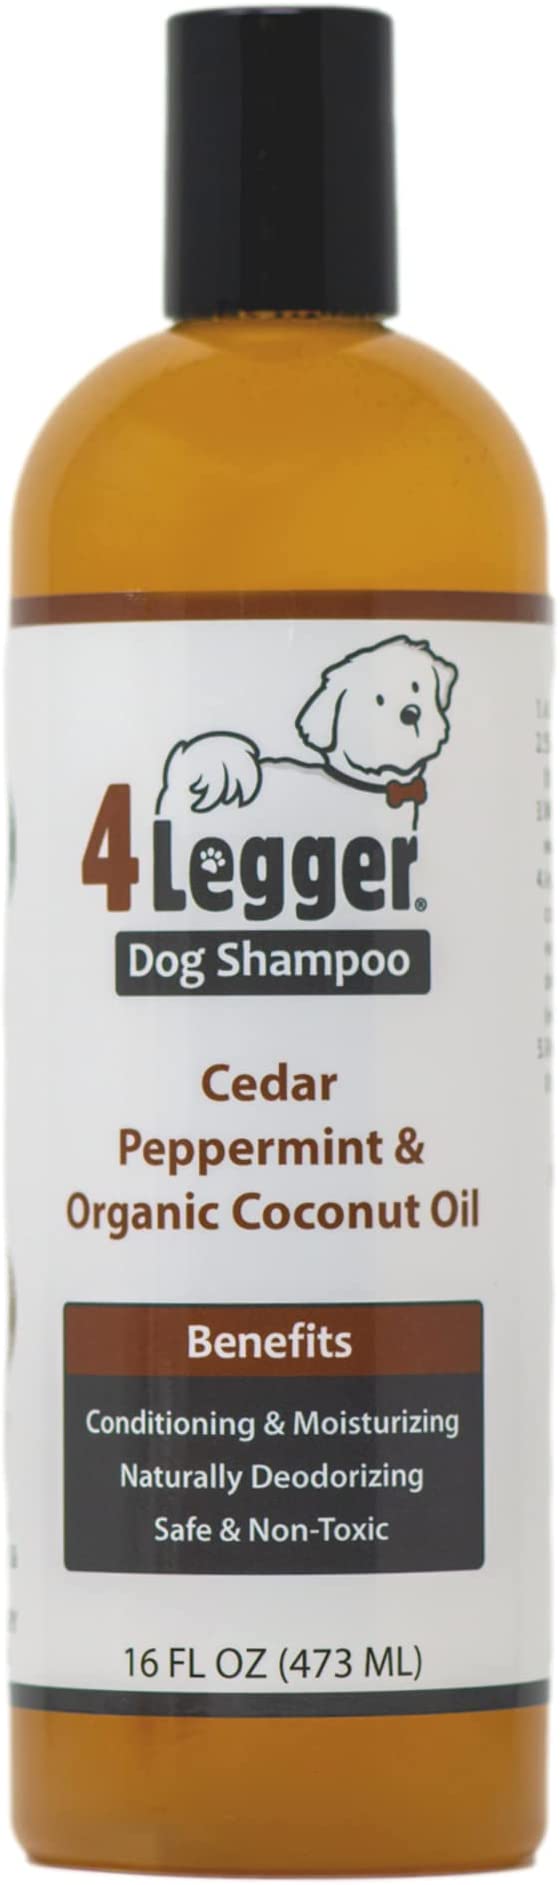 4Legger USDA Certified Organic Dog Shampoo and Conditioner - All Natural Dog Shampoo Eliminates Odor with Cedar Essential Oil, Coconut Oil, and Aloe for Soothing Relief of Itchy Skin - Made in USA